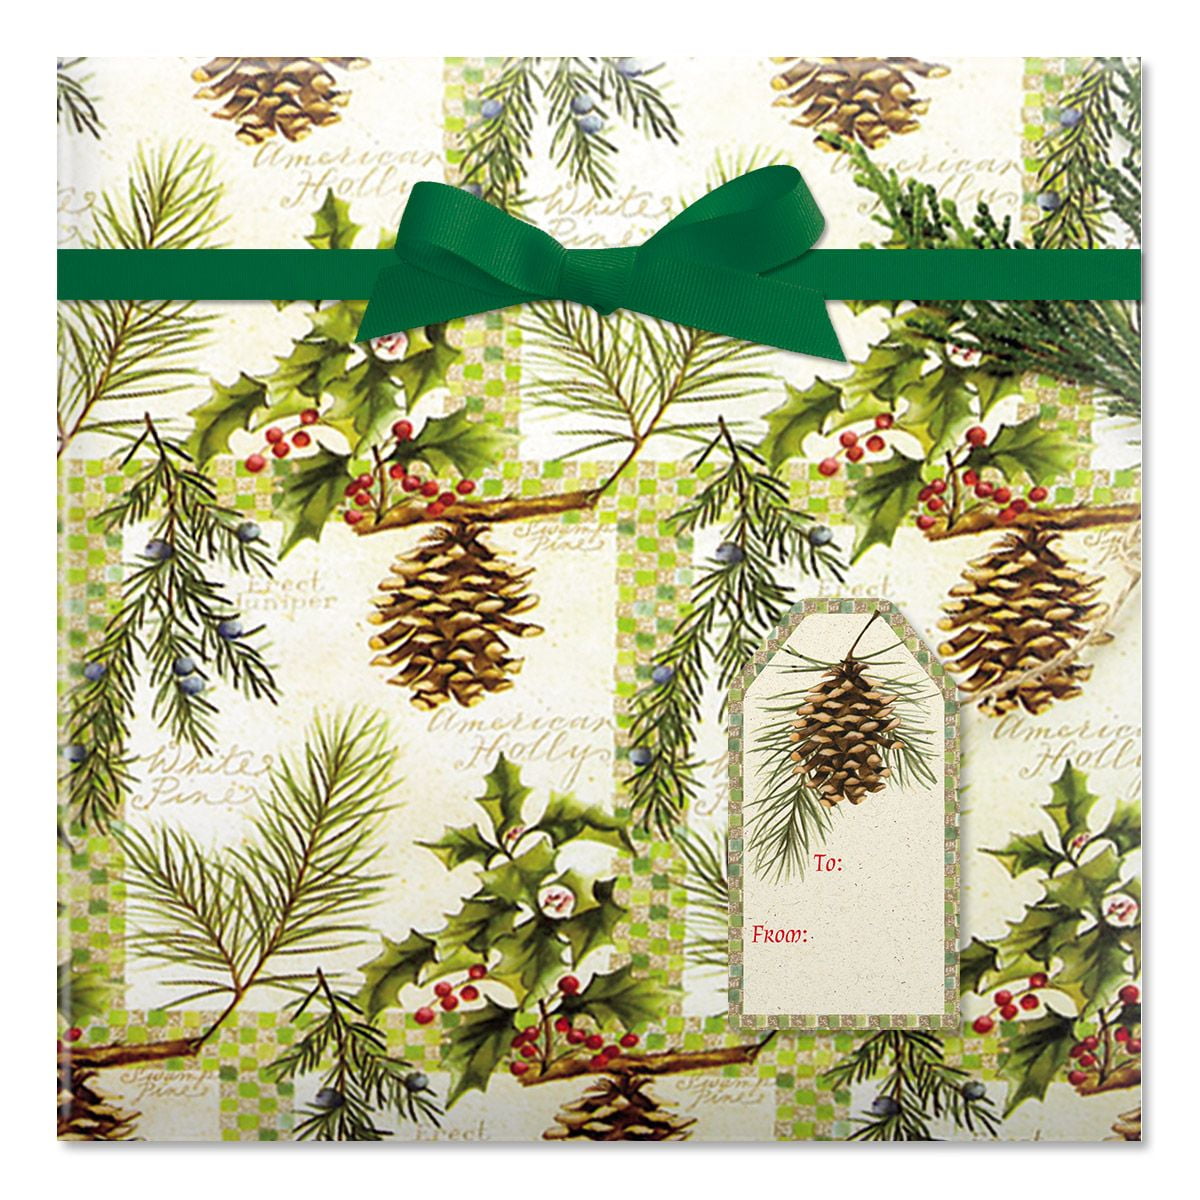 Vintage Christmas Wrapping Paper Rolls Christmas Gift Wrap Green